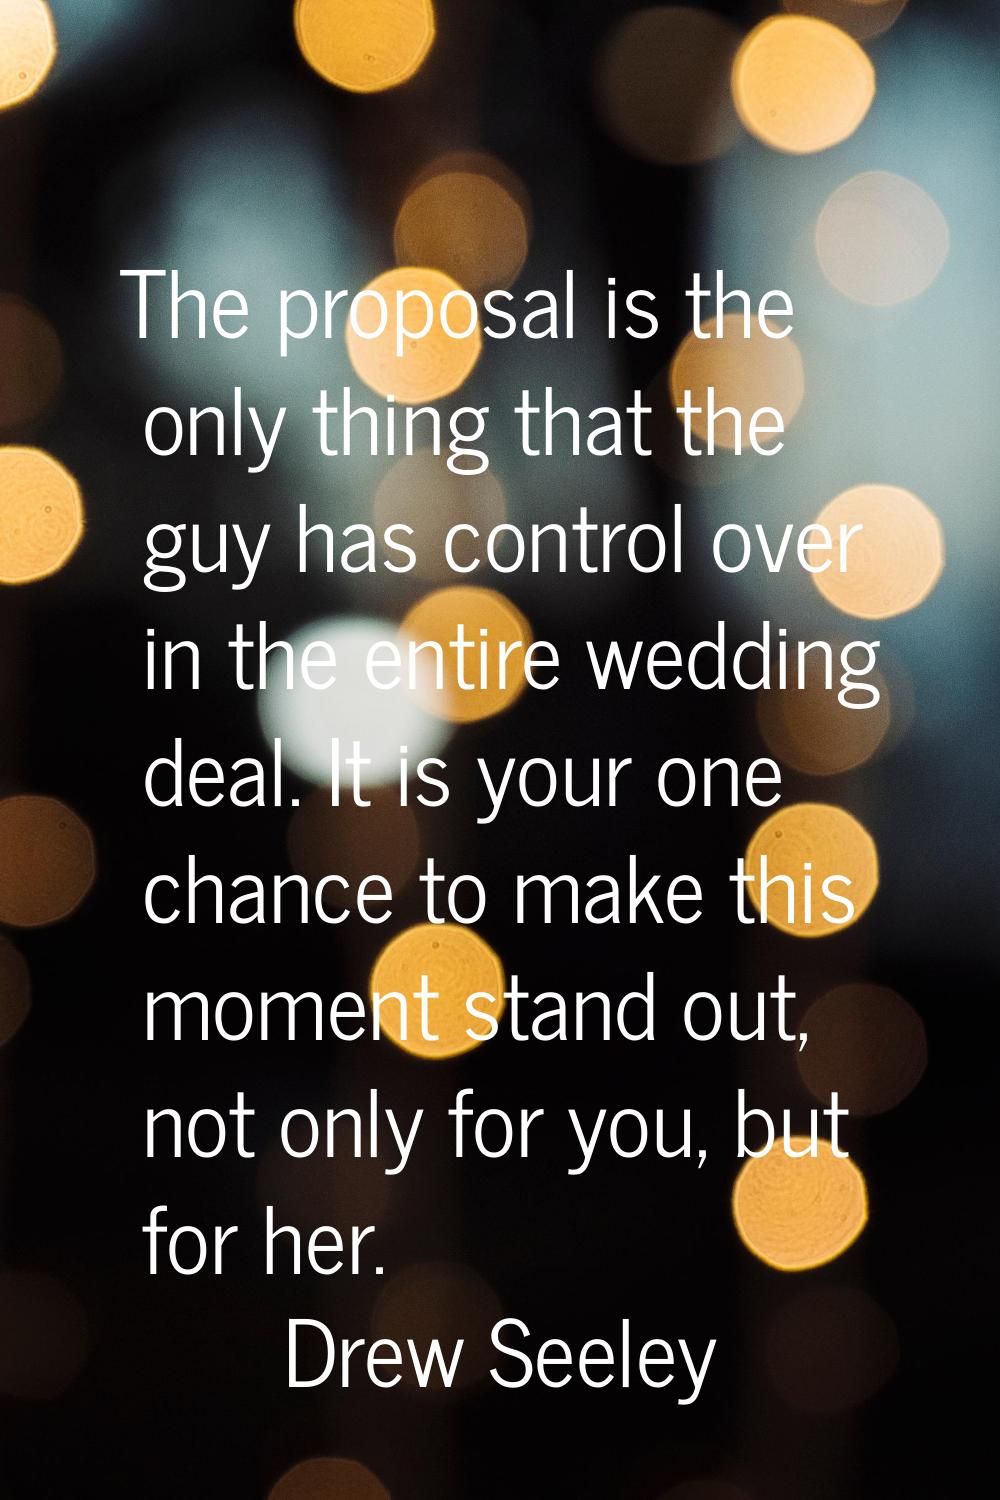 The proposal is the only thing that the guy has control over in the entire wedding deal. It is your